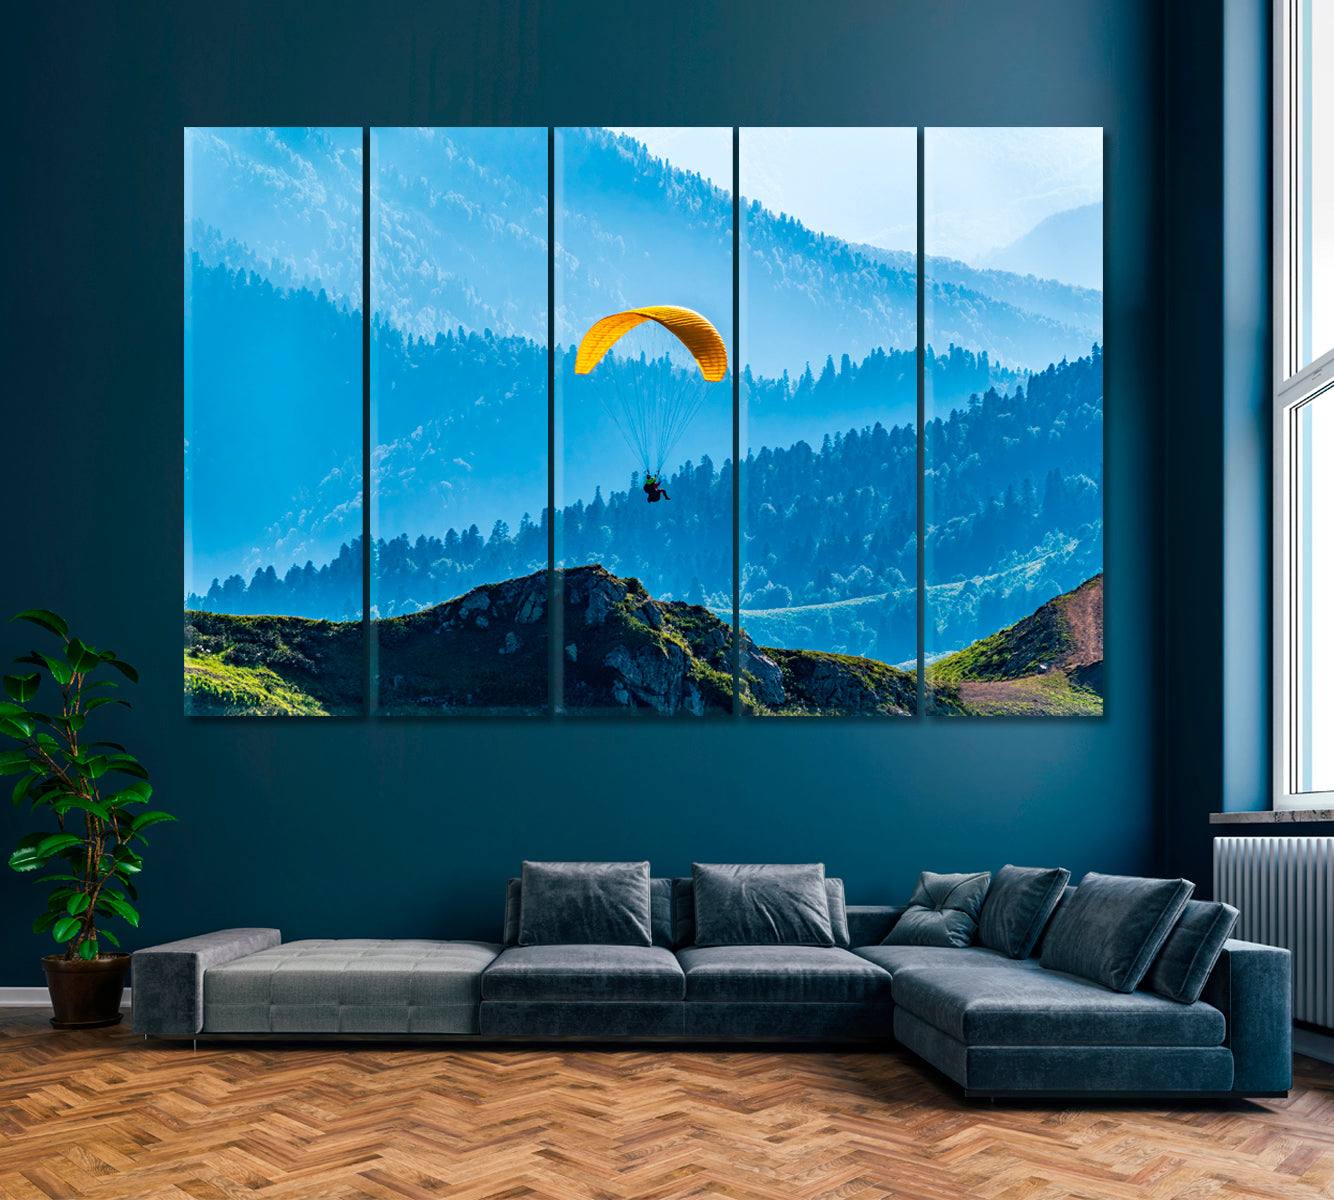 Yellow Paraglider over Green Mountains Canvas Print ArtLexy 5 Panels 36"x24" inches 